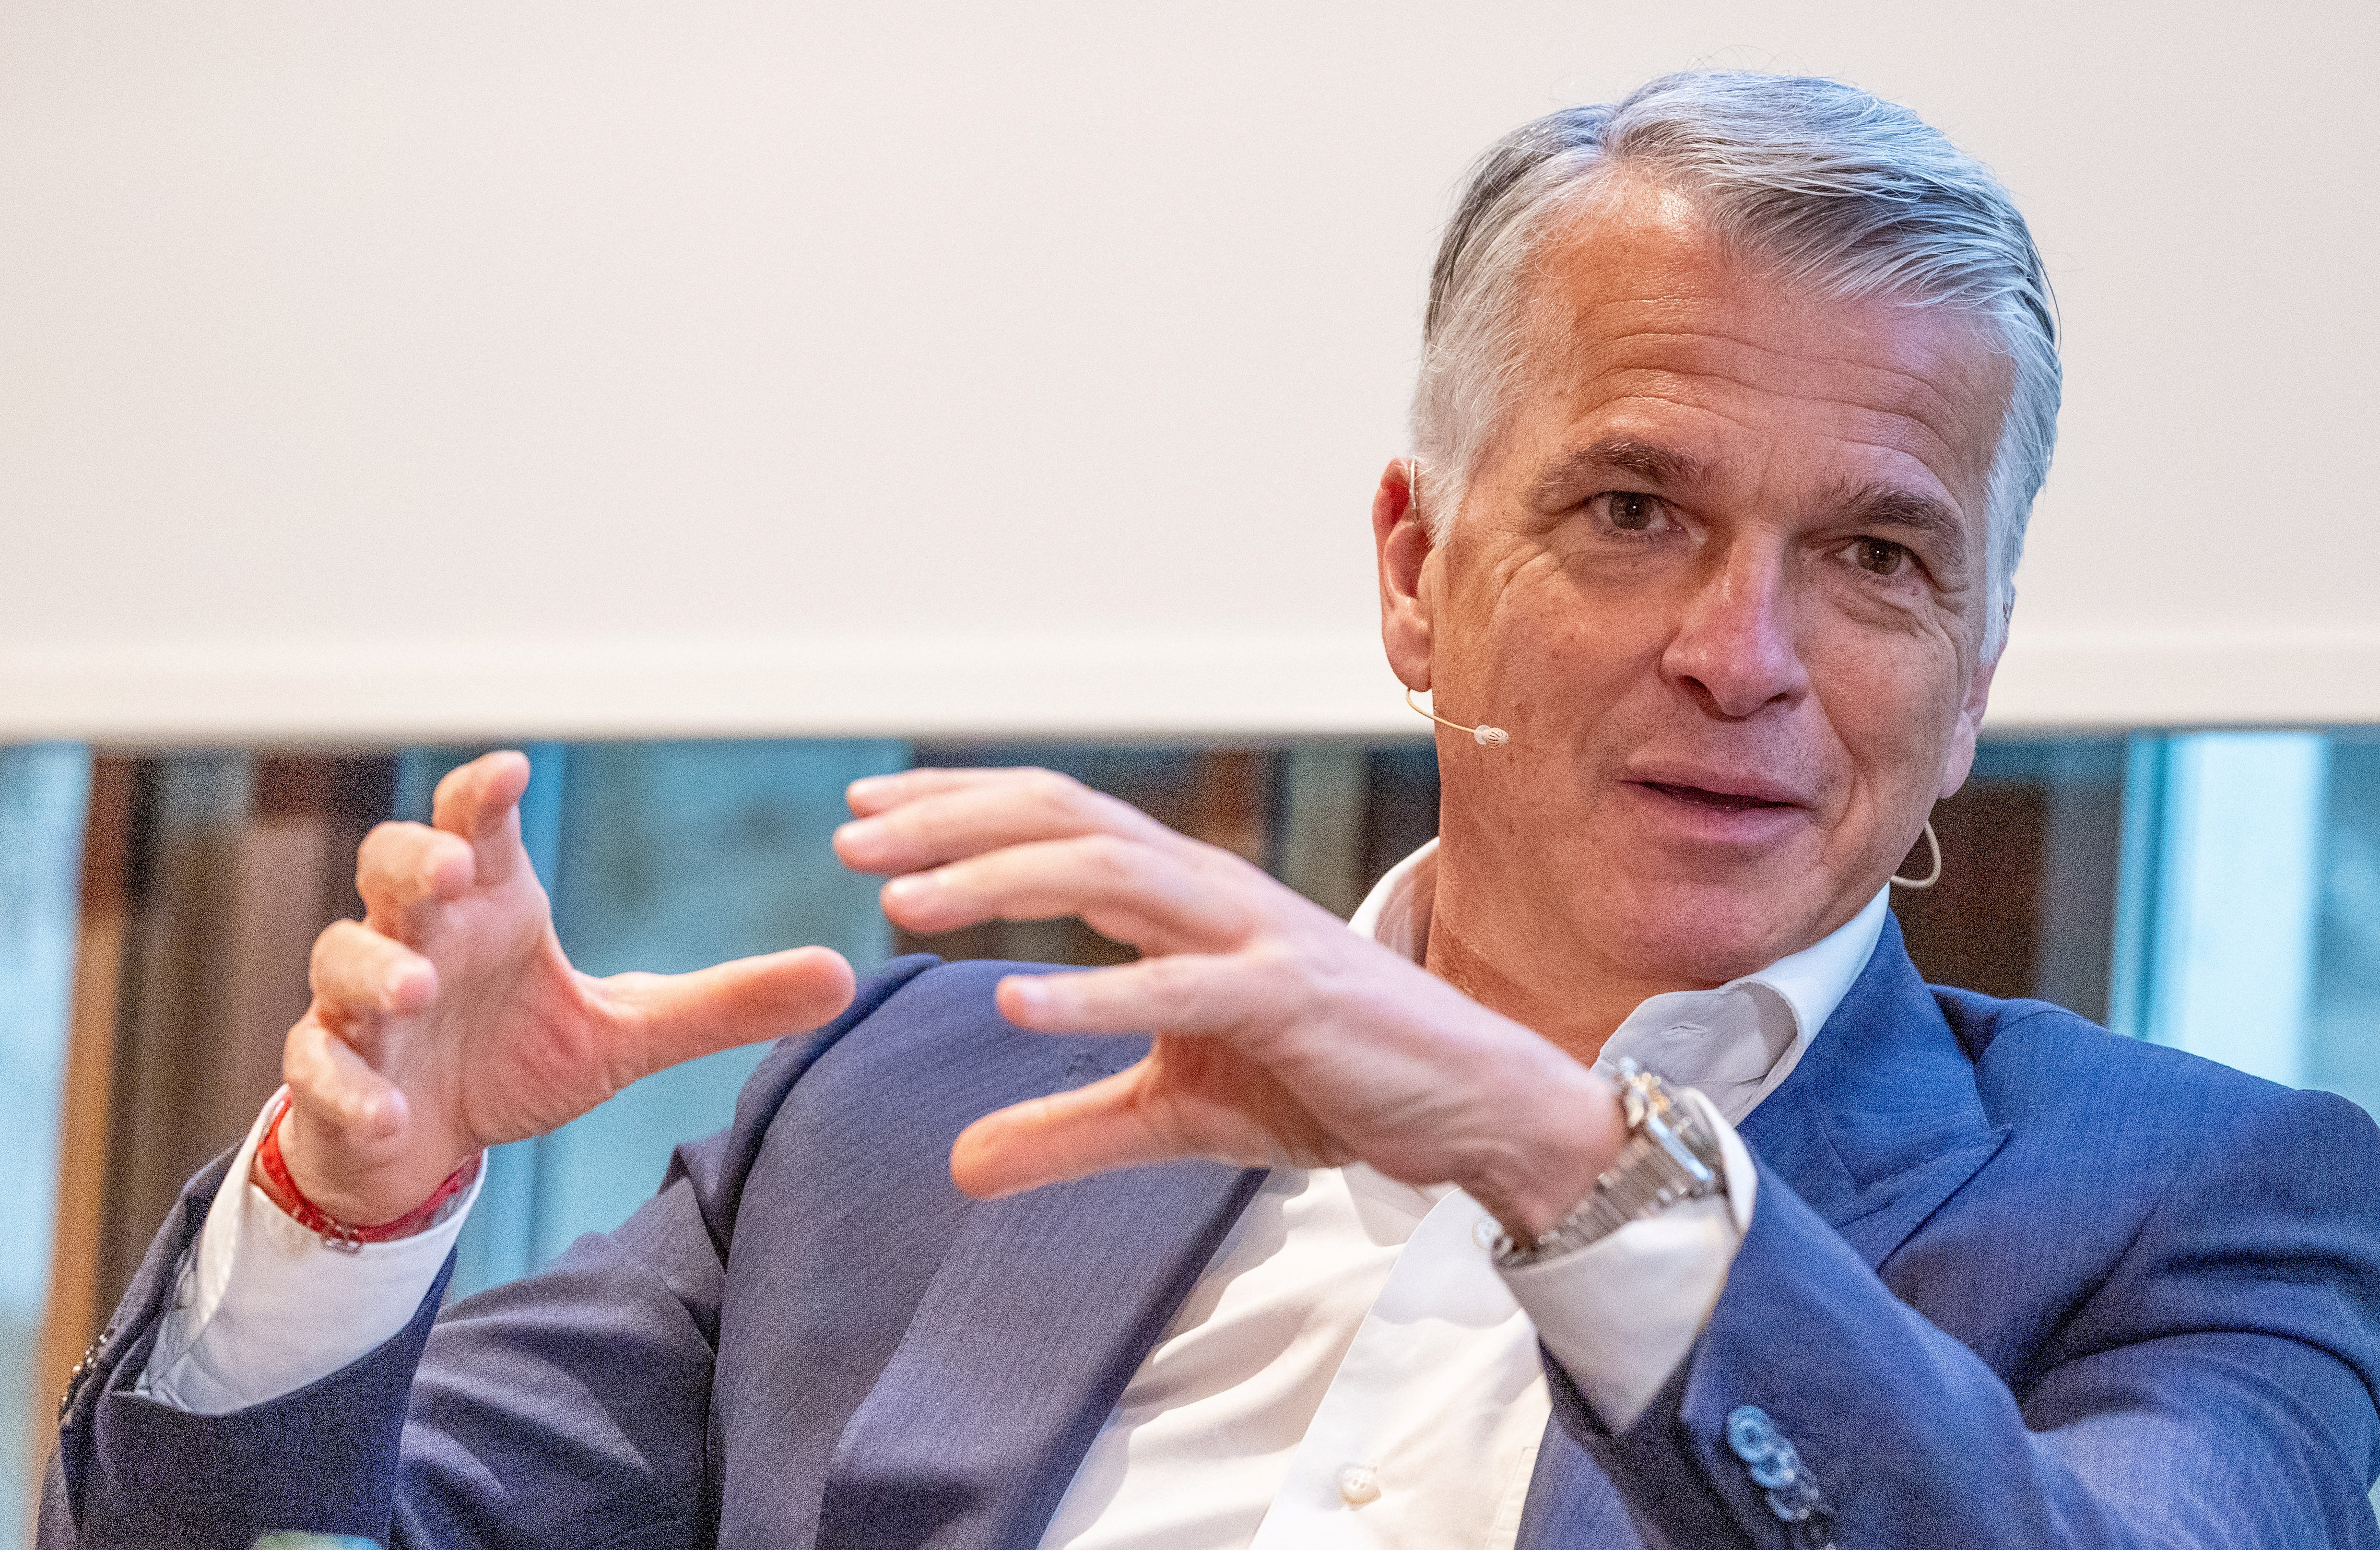 UBS CEO Ermotti attends the Reuters NEXT Newsmaker event in Zurich